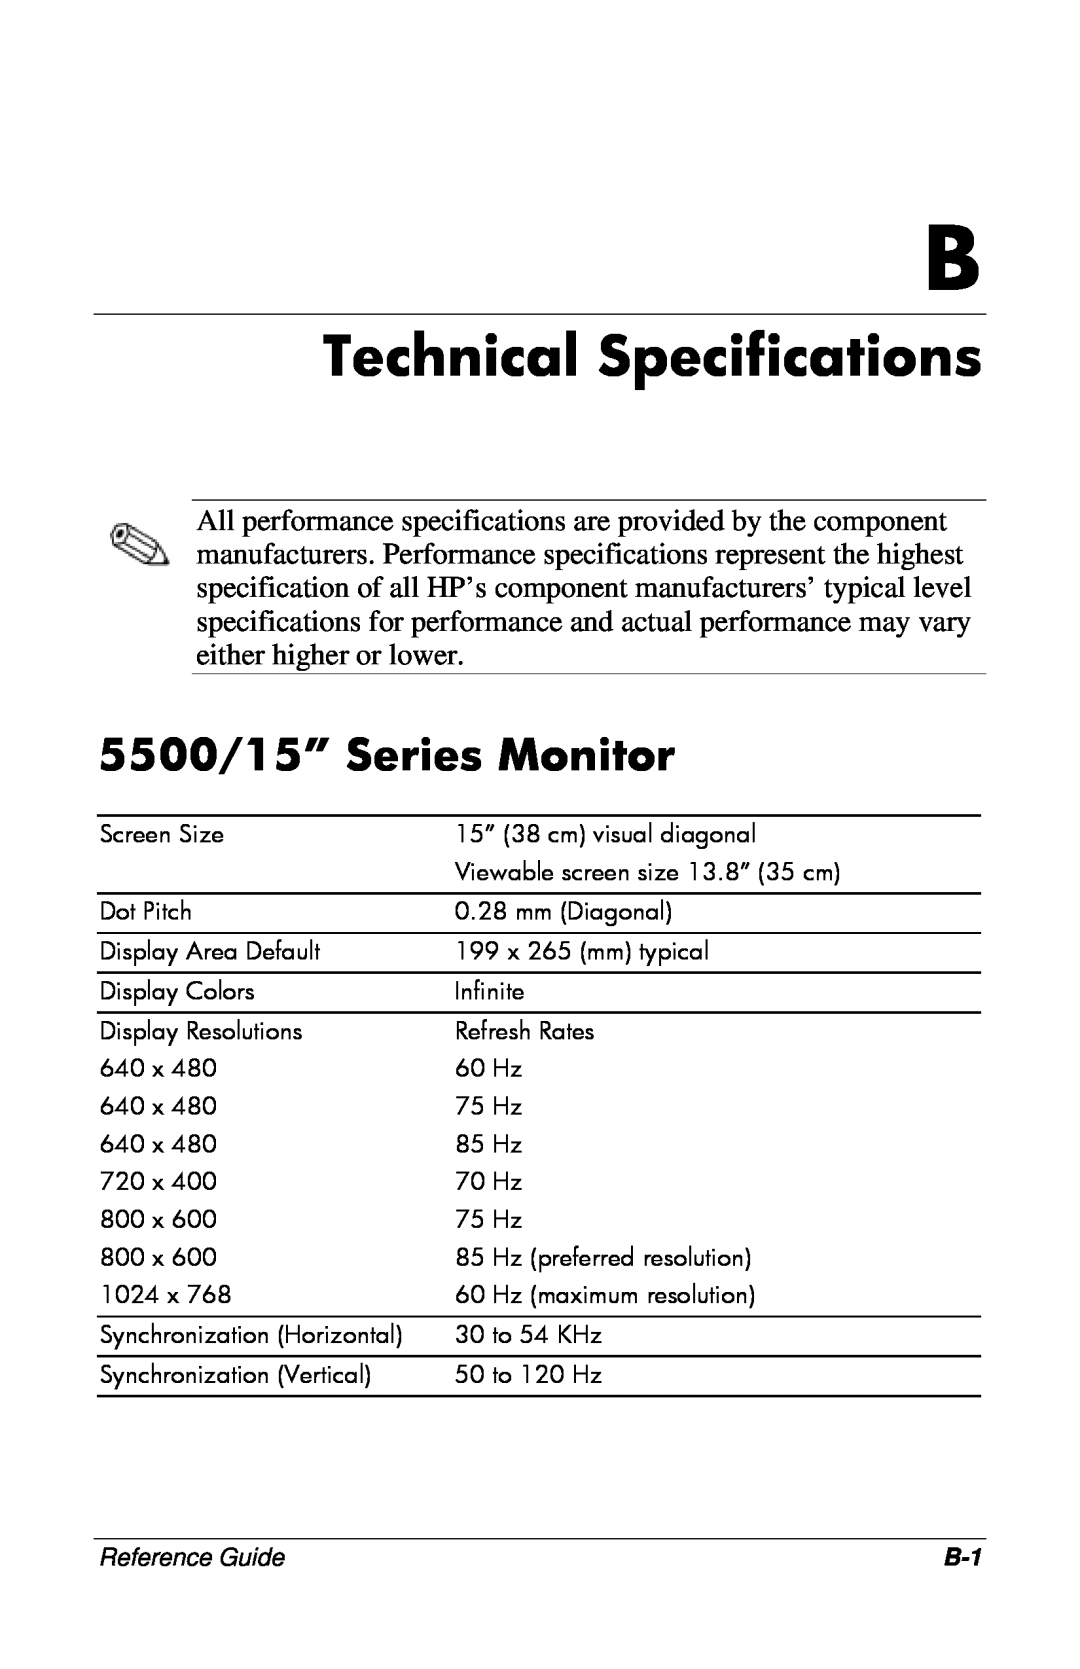 HP mx704, 7500, CRT, 9500, 7550 manual Technical Specifications, 5500/15” Series Monitor 